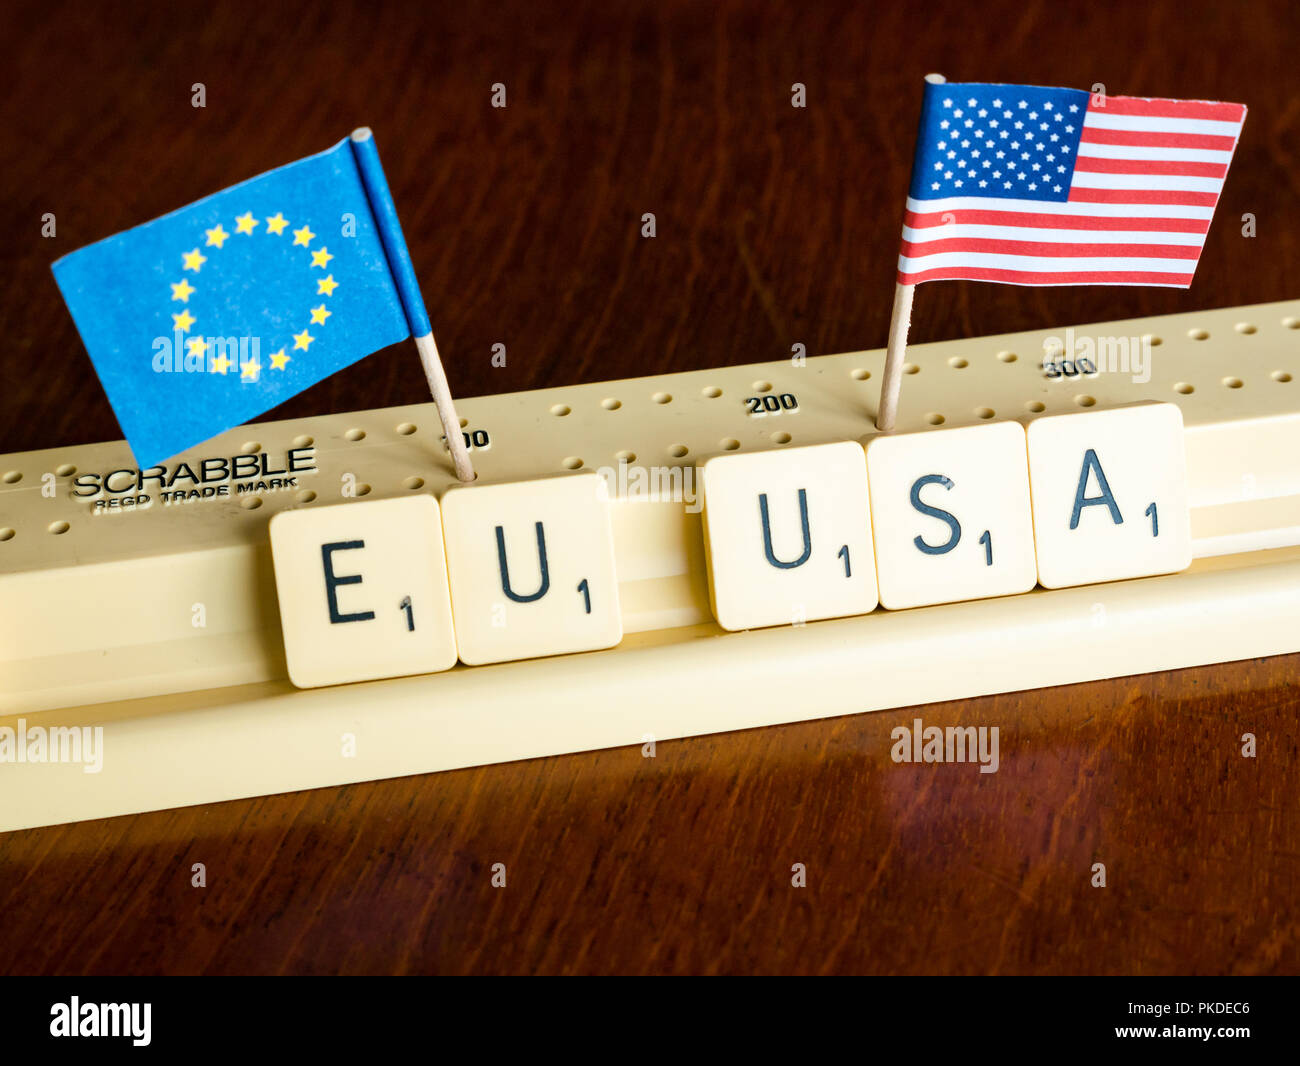 Scrabble letters spelling EU and USA with American and European Union flags on mahogany background to illustrate nation, trade and negotiation concept Stock Photo